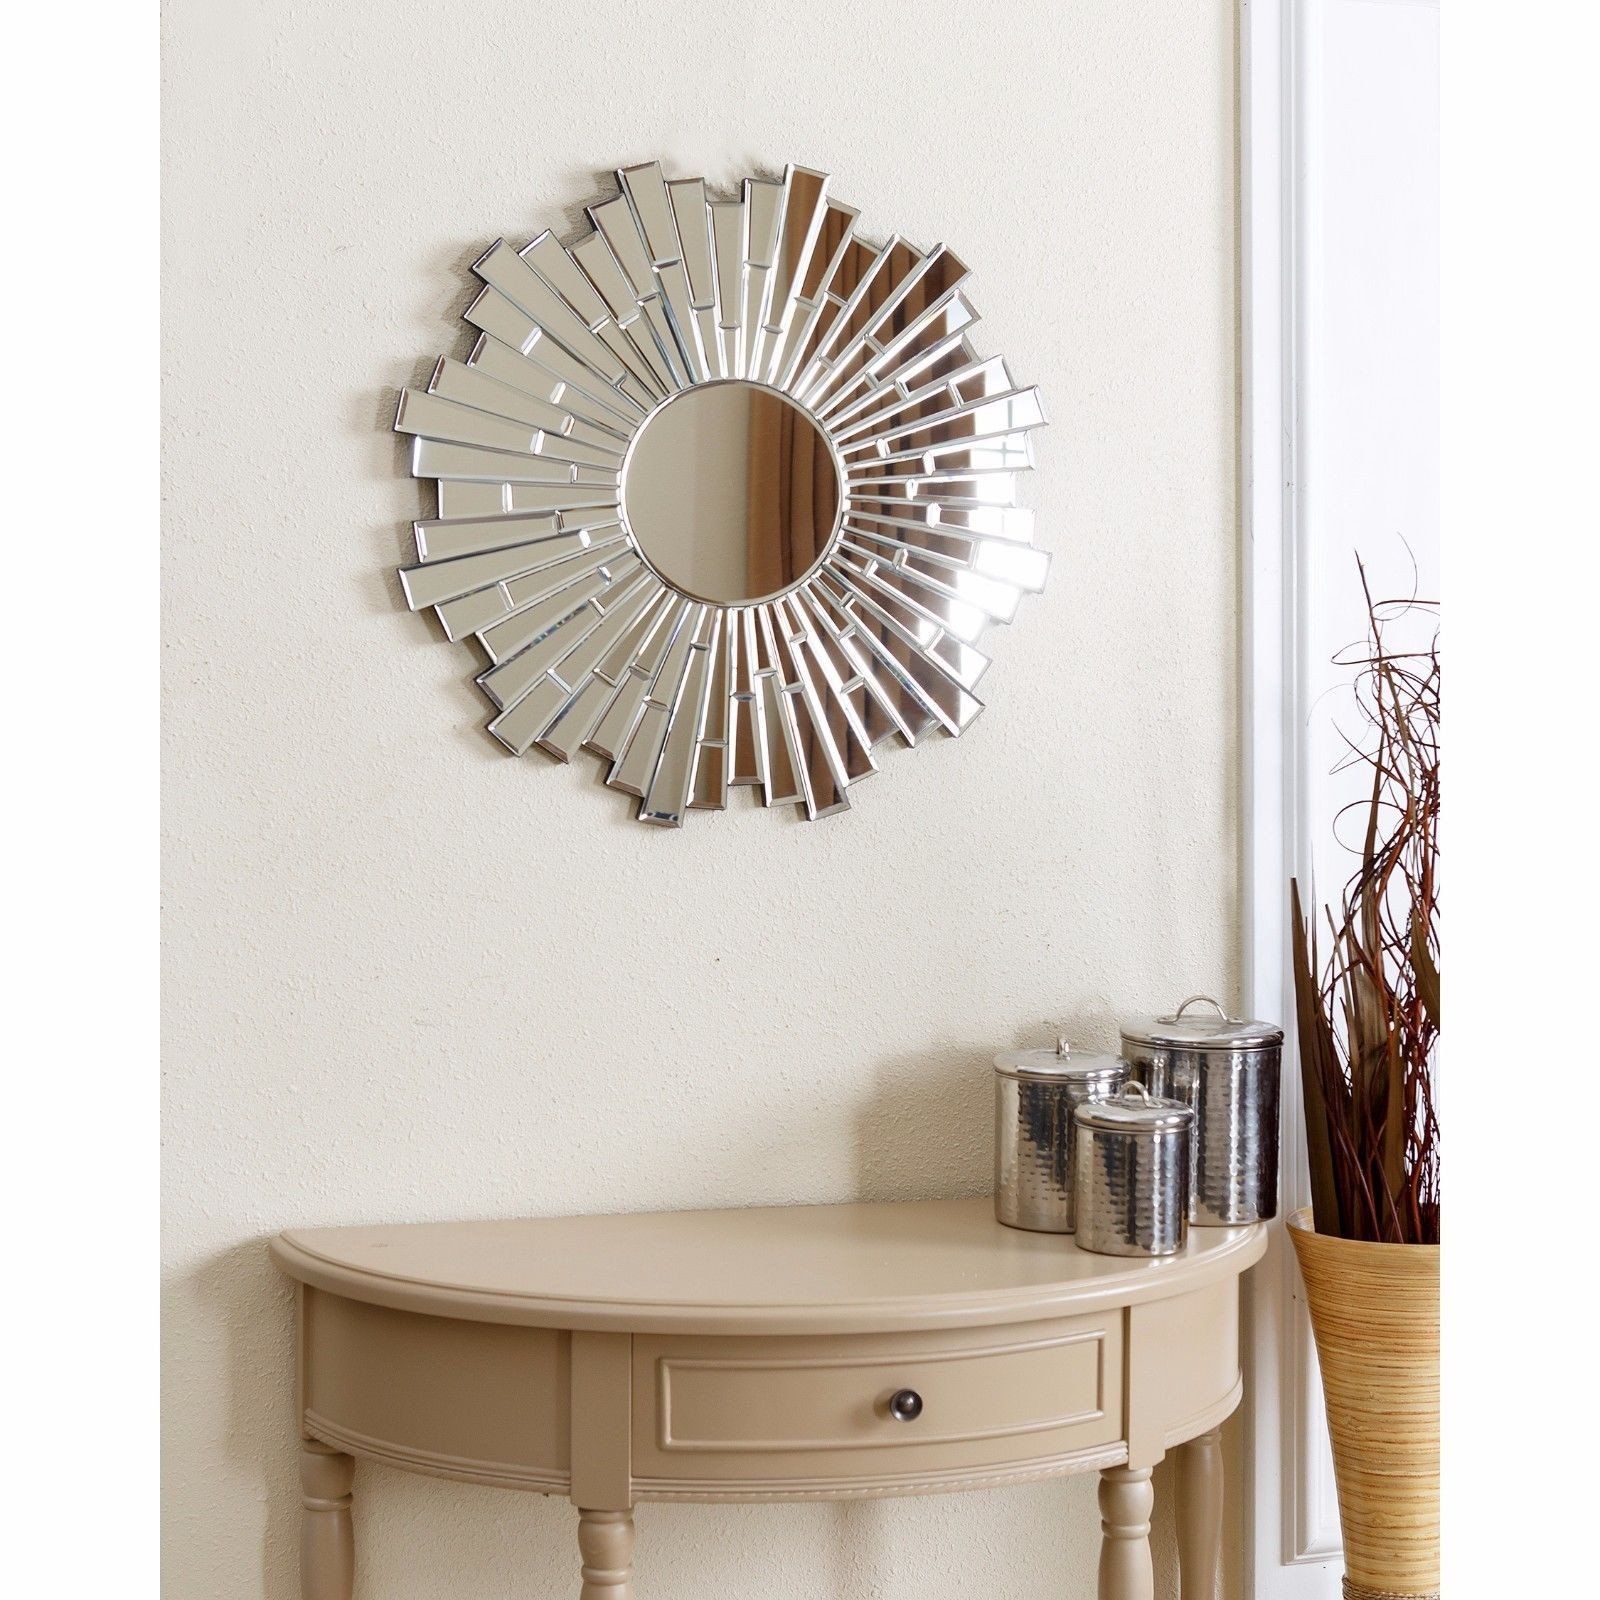 Small Mirrors For Wall Decor Inspirational Round Wall Mirror Modern Within Vertical Round Wall Mirrors (View 7 of 15)